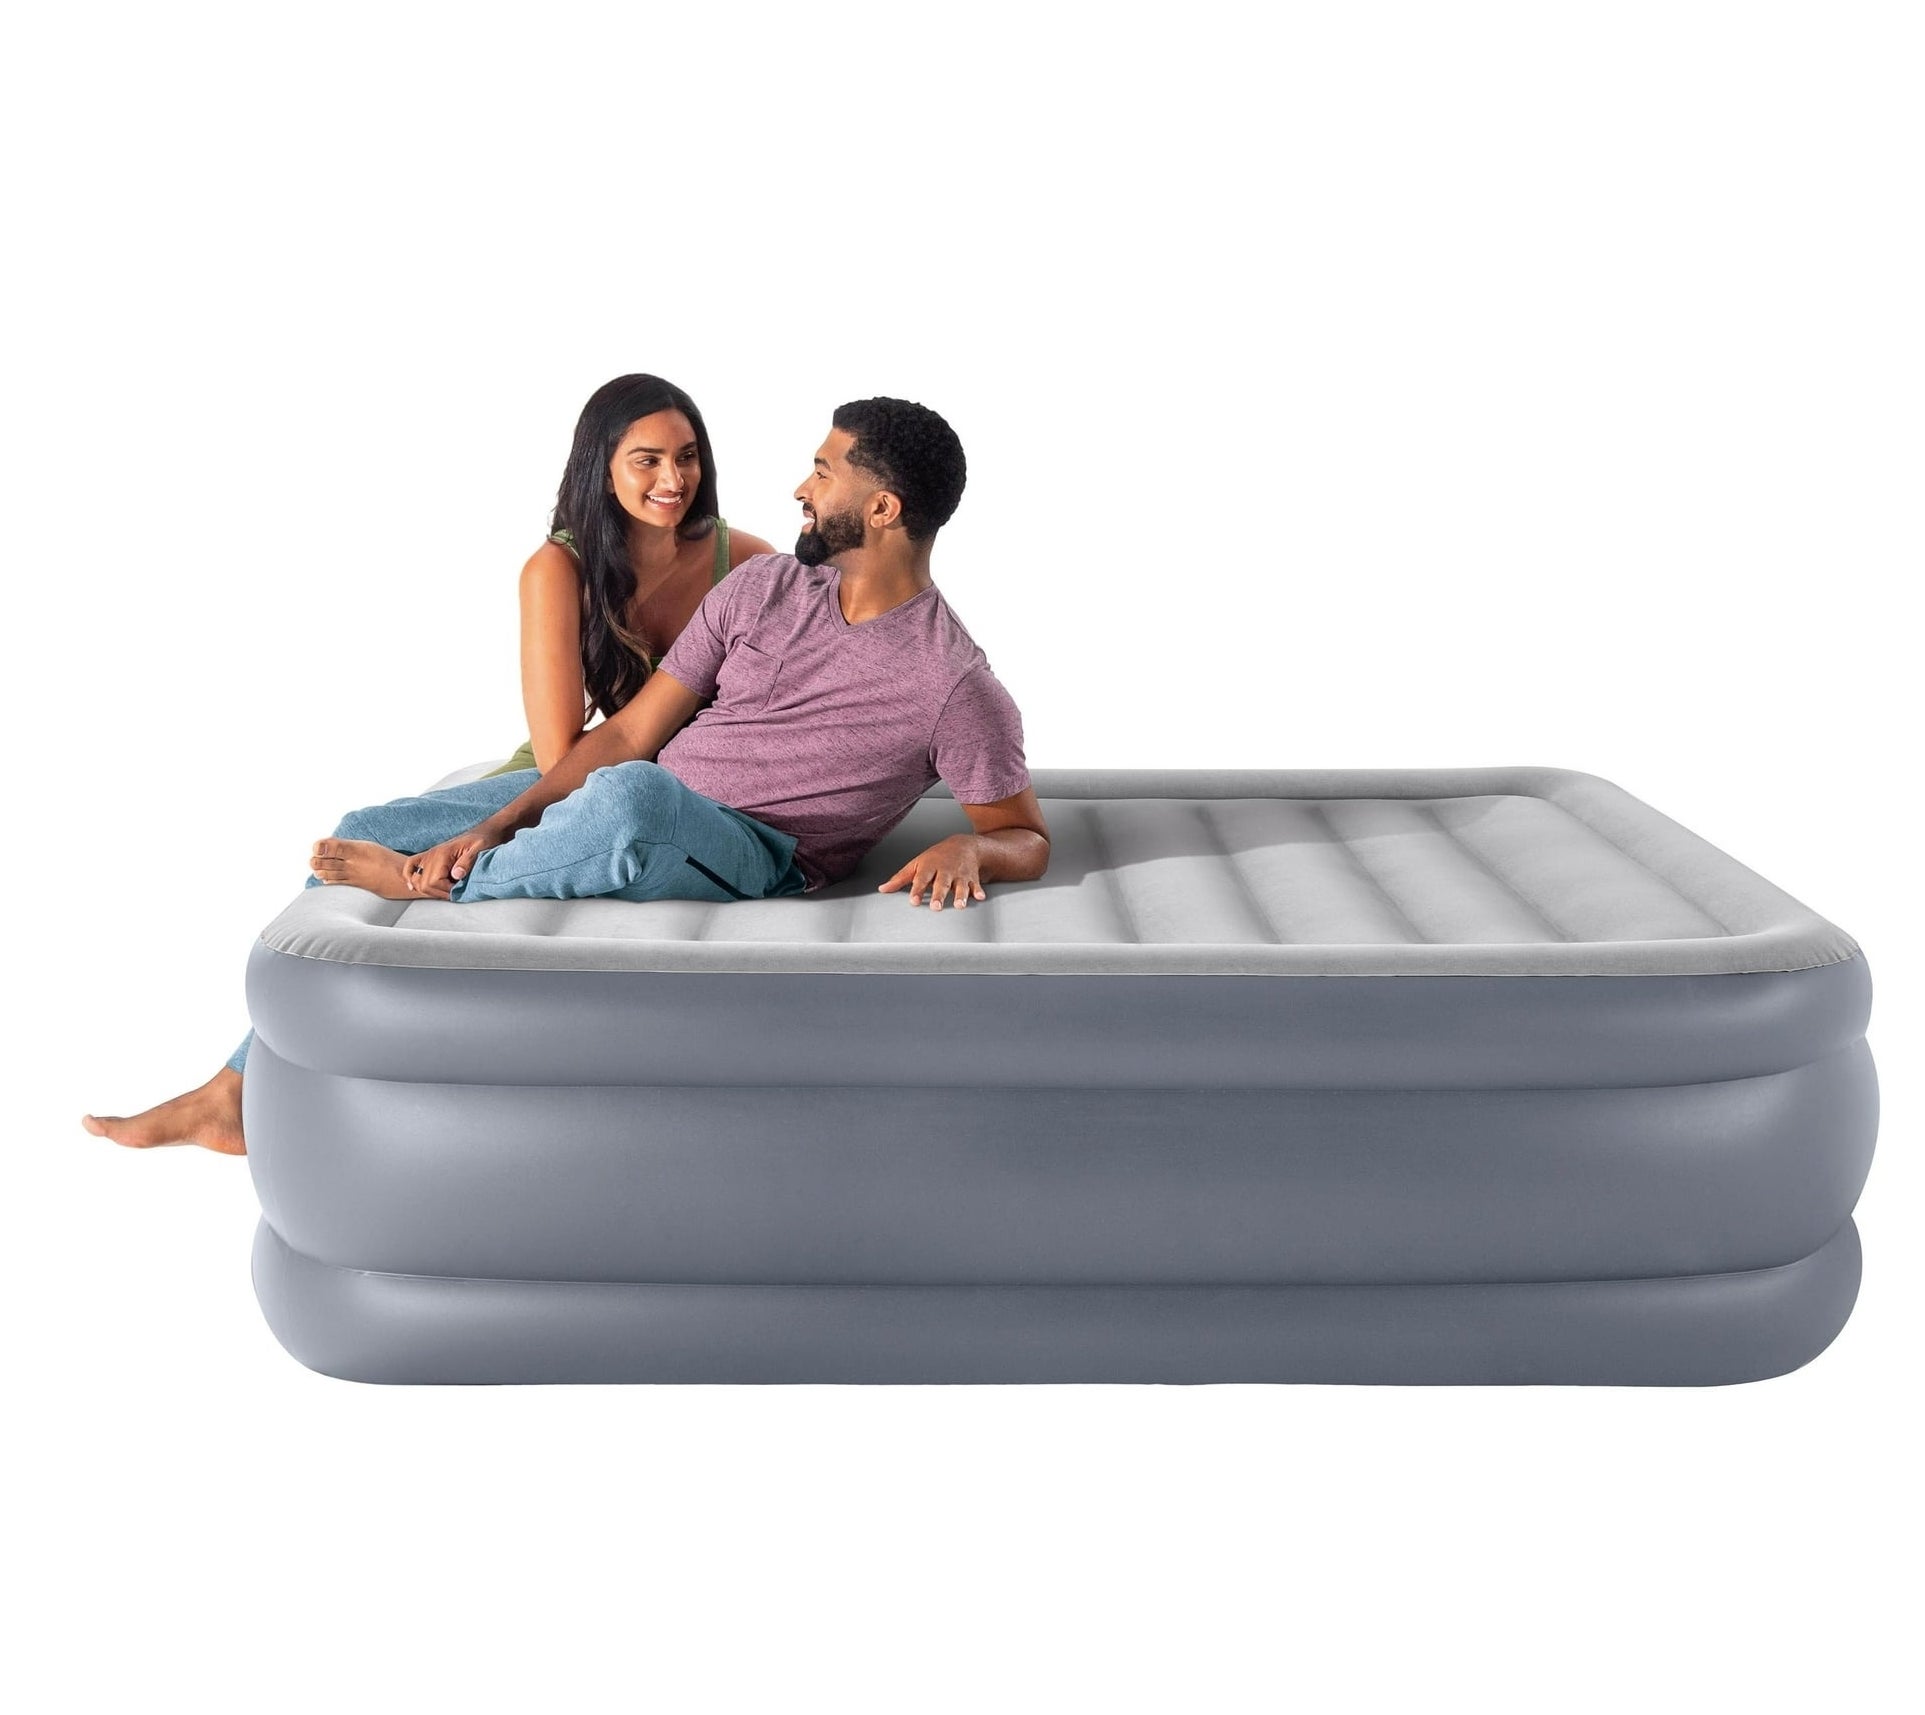 Two models sitting on the grey air mattress.